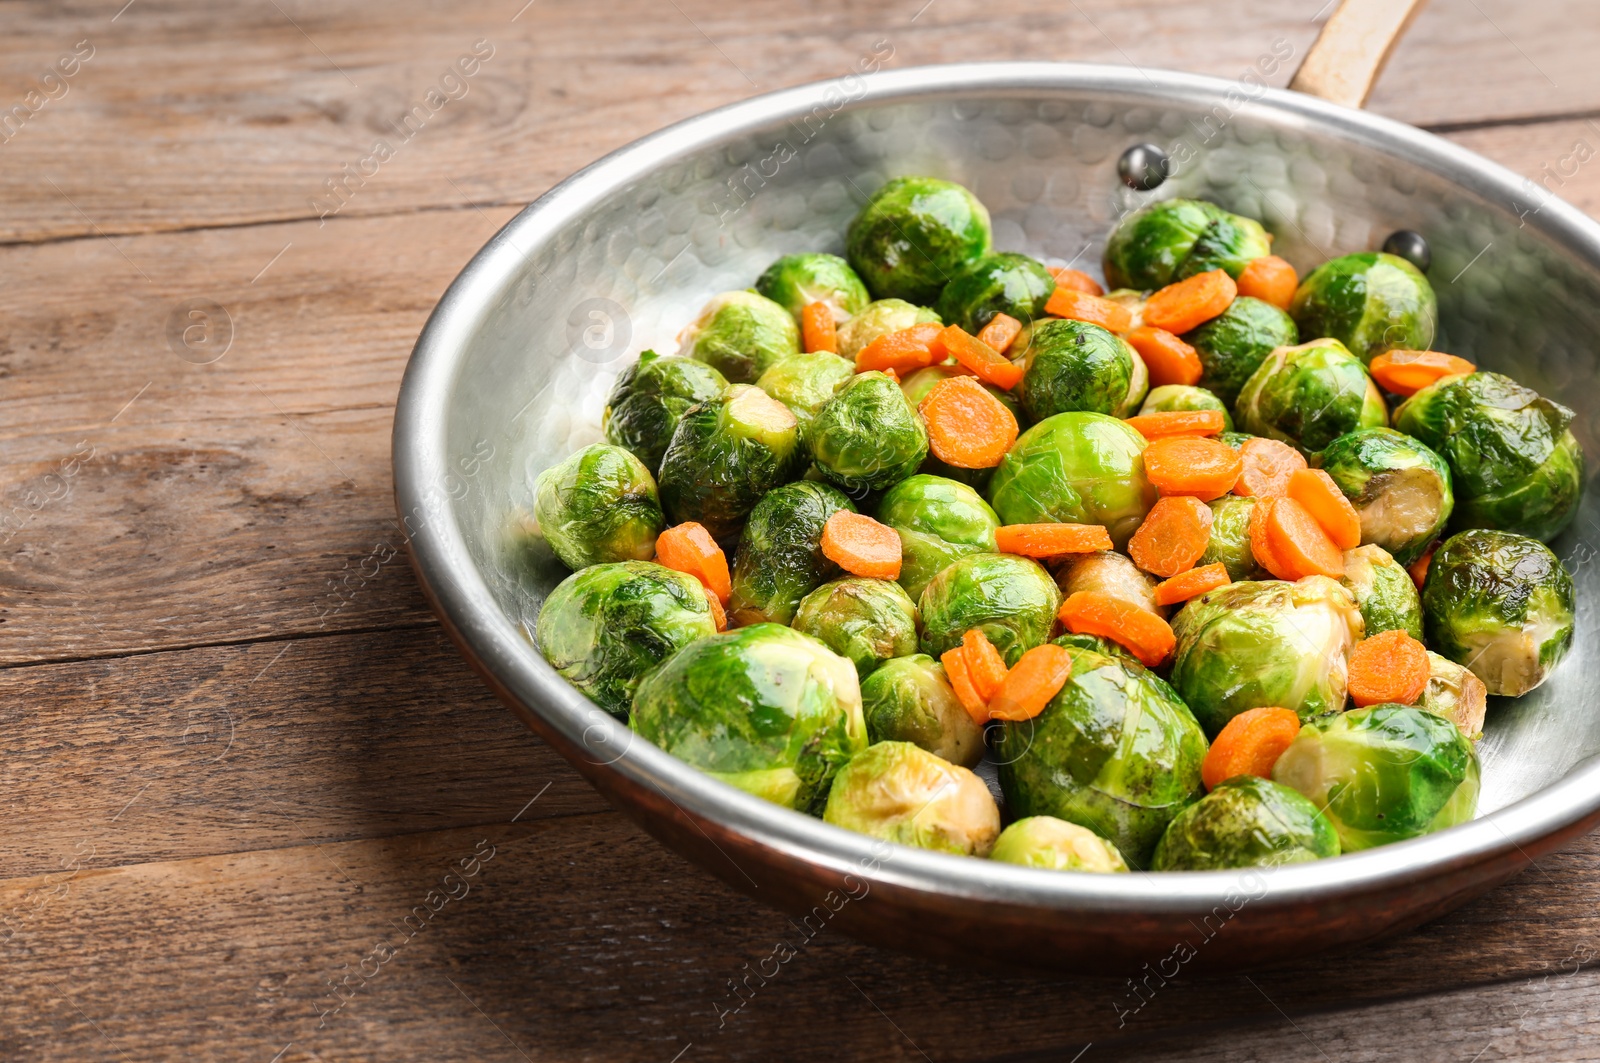 Photo of Roasted Brussels sprouts with carrot in frying pan on wooden table